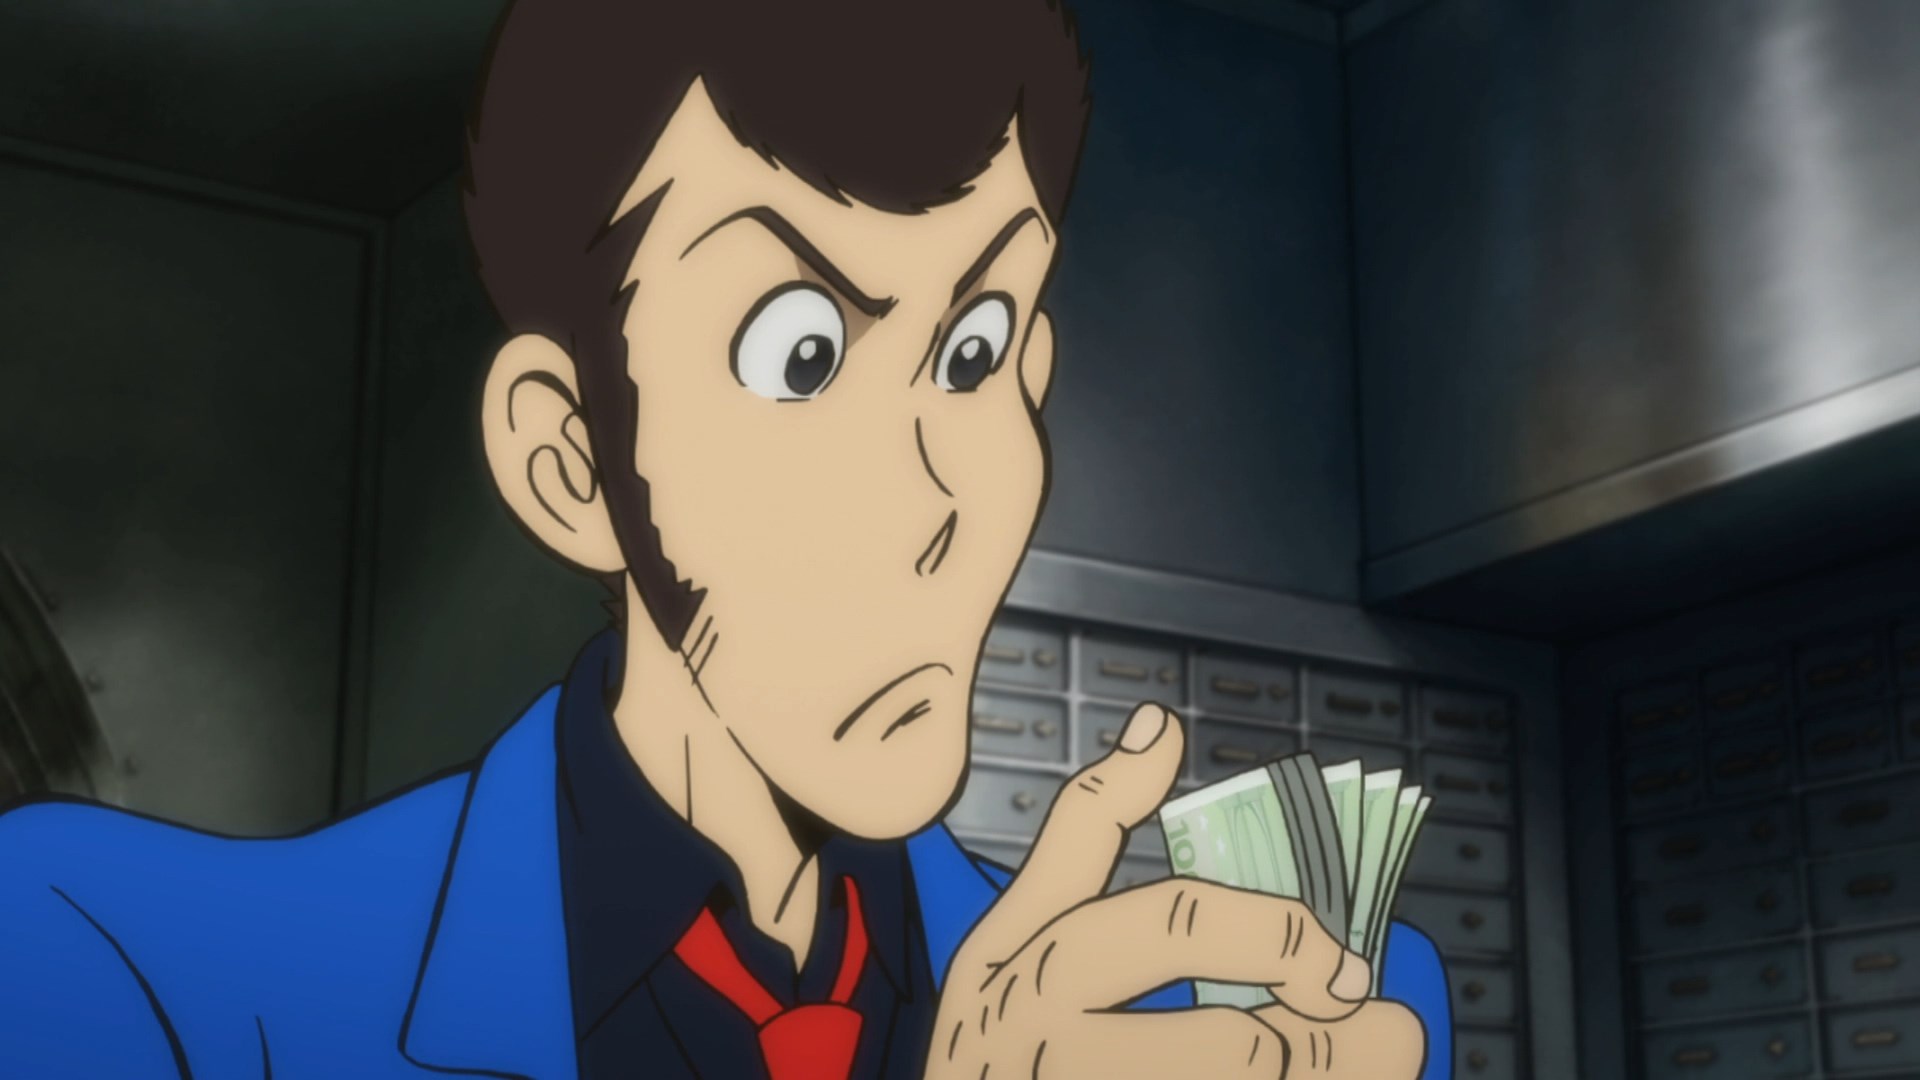 Lupin the Third Part4 (Lupin III 2015) Review - AstroNerdBoy's Anime &  Manga Blog | AstroNerdBoy's Anime & Manga Blog